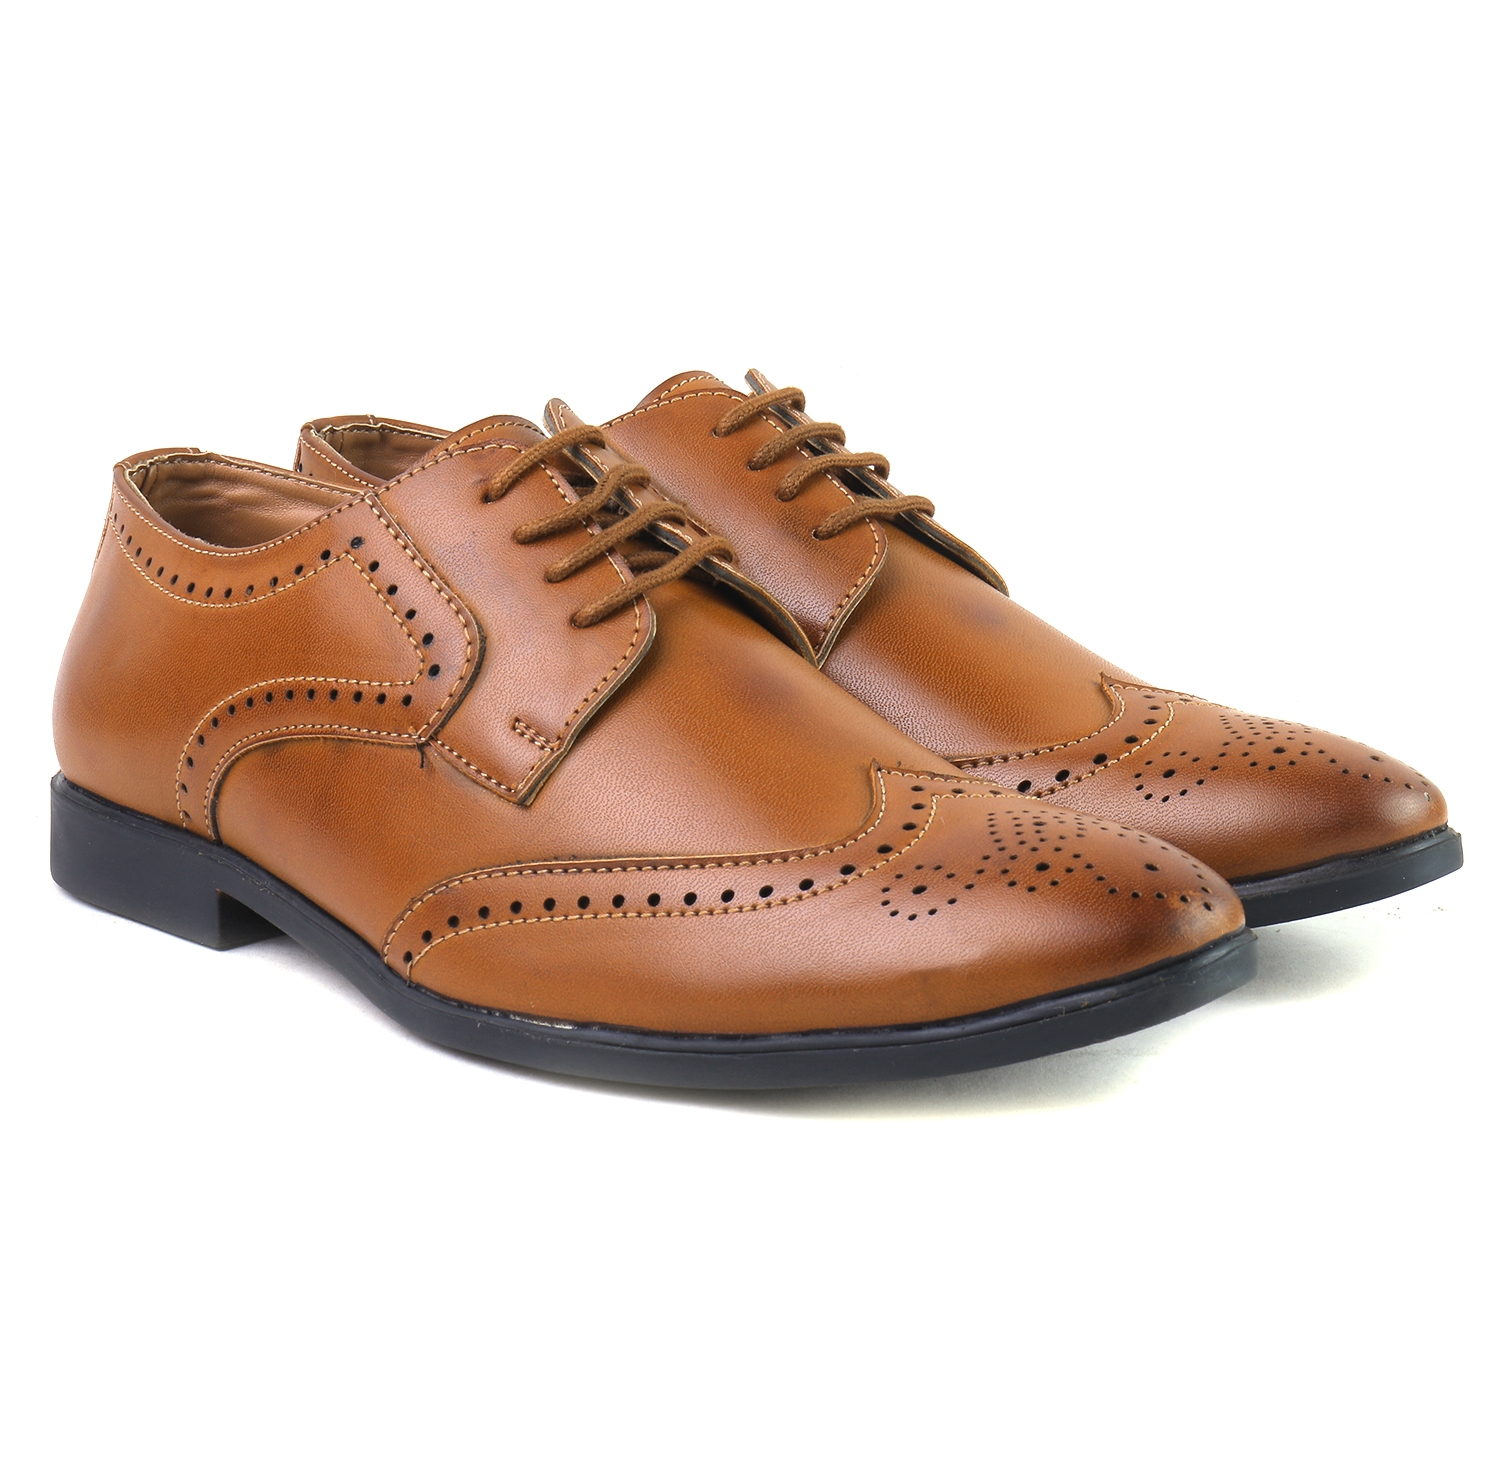 BRATVA | J10 1501 Mens Casual Office Corporate Evening Dress Brogue Shoes for Men in colour Black|Brown|Tan|Cherry